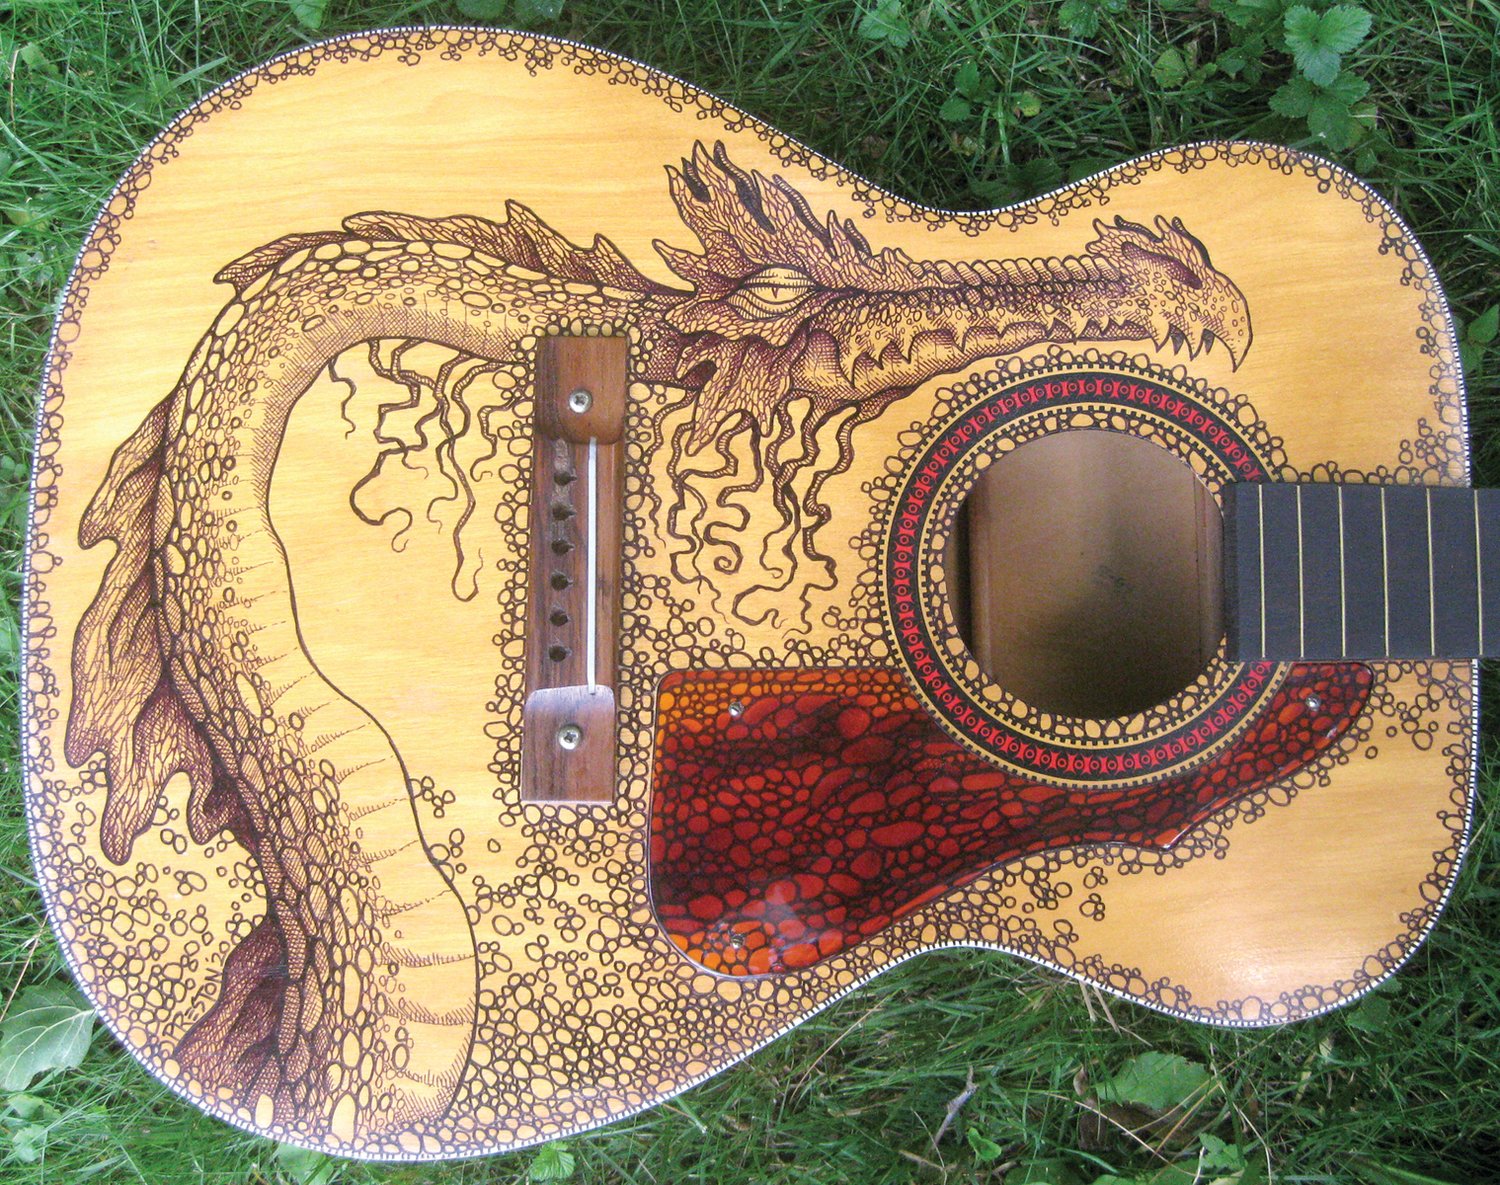 A guitar adorned with an original dragon painting by Dennis Preston.